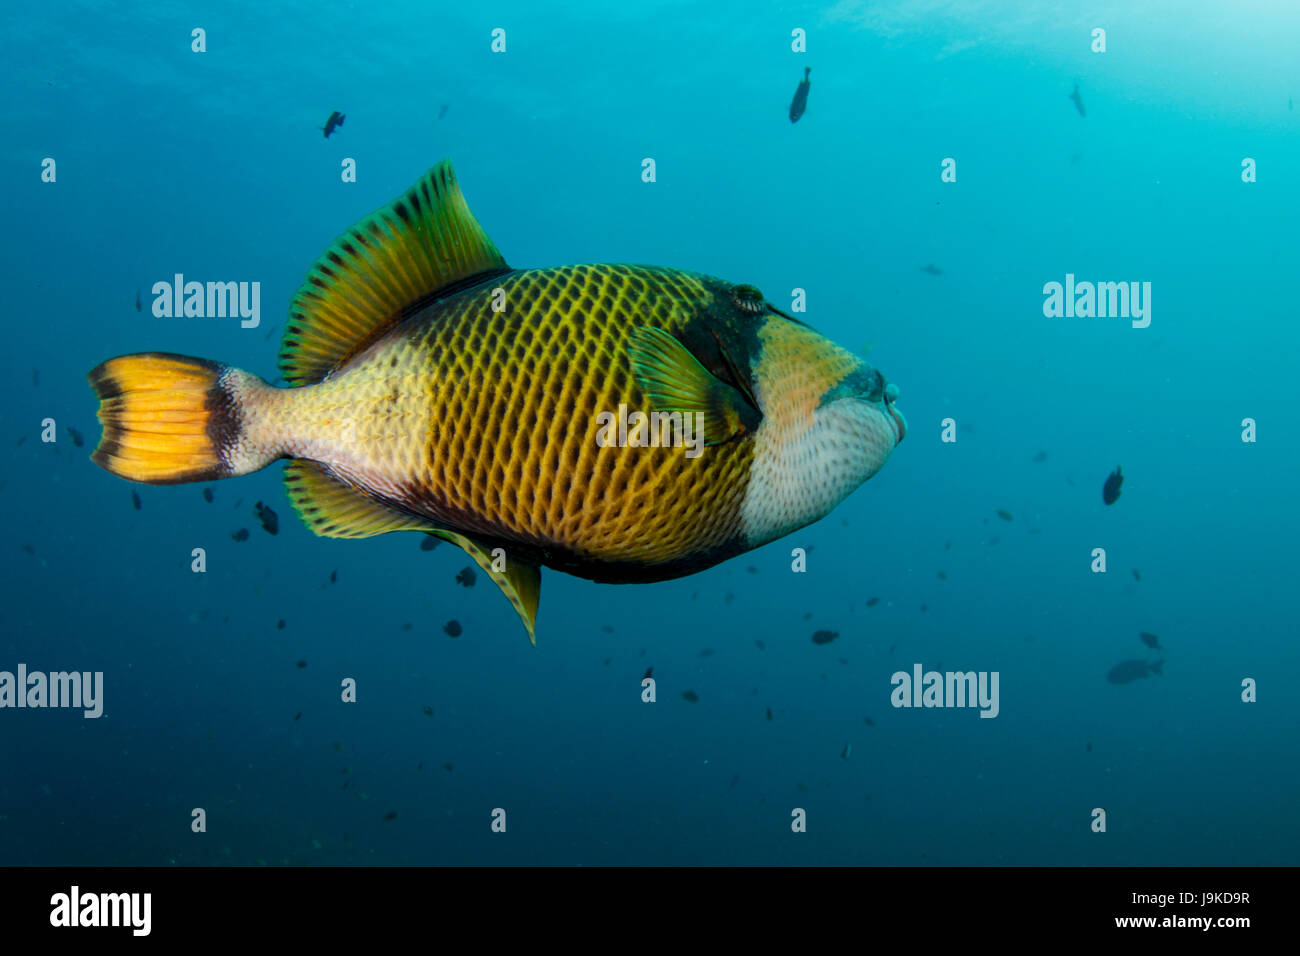 A lone titan triggerfish (Balistoides viridescens) roaming the open water of Indo-Pacific Stock Photo